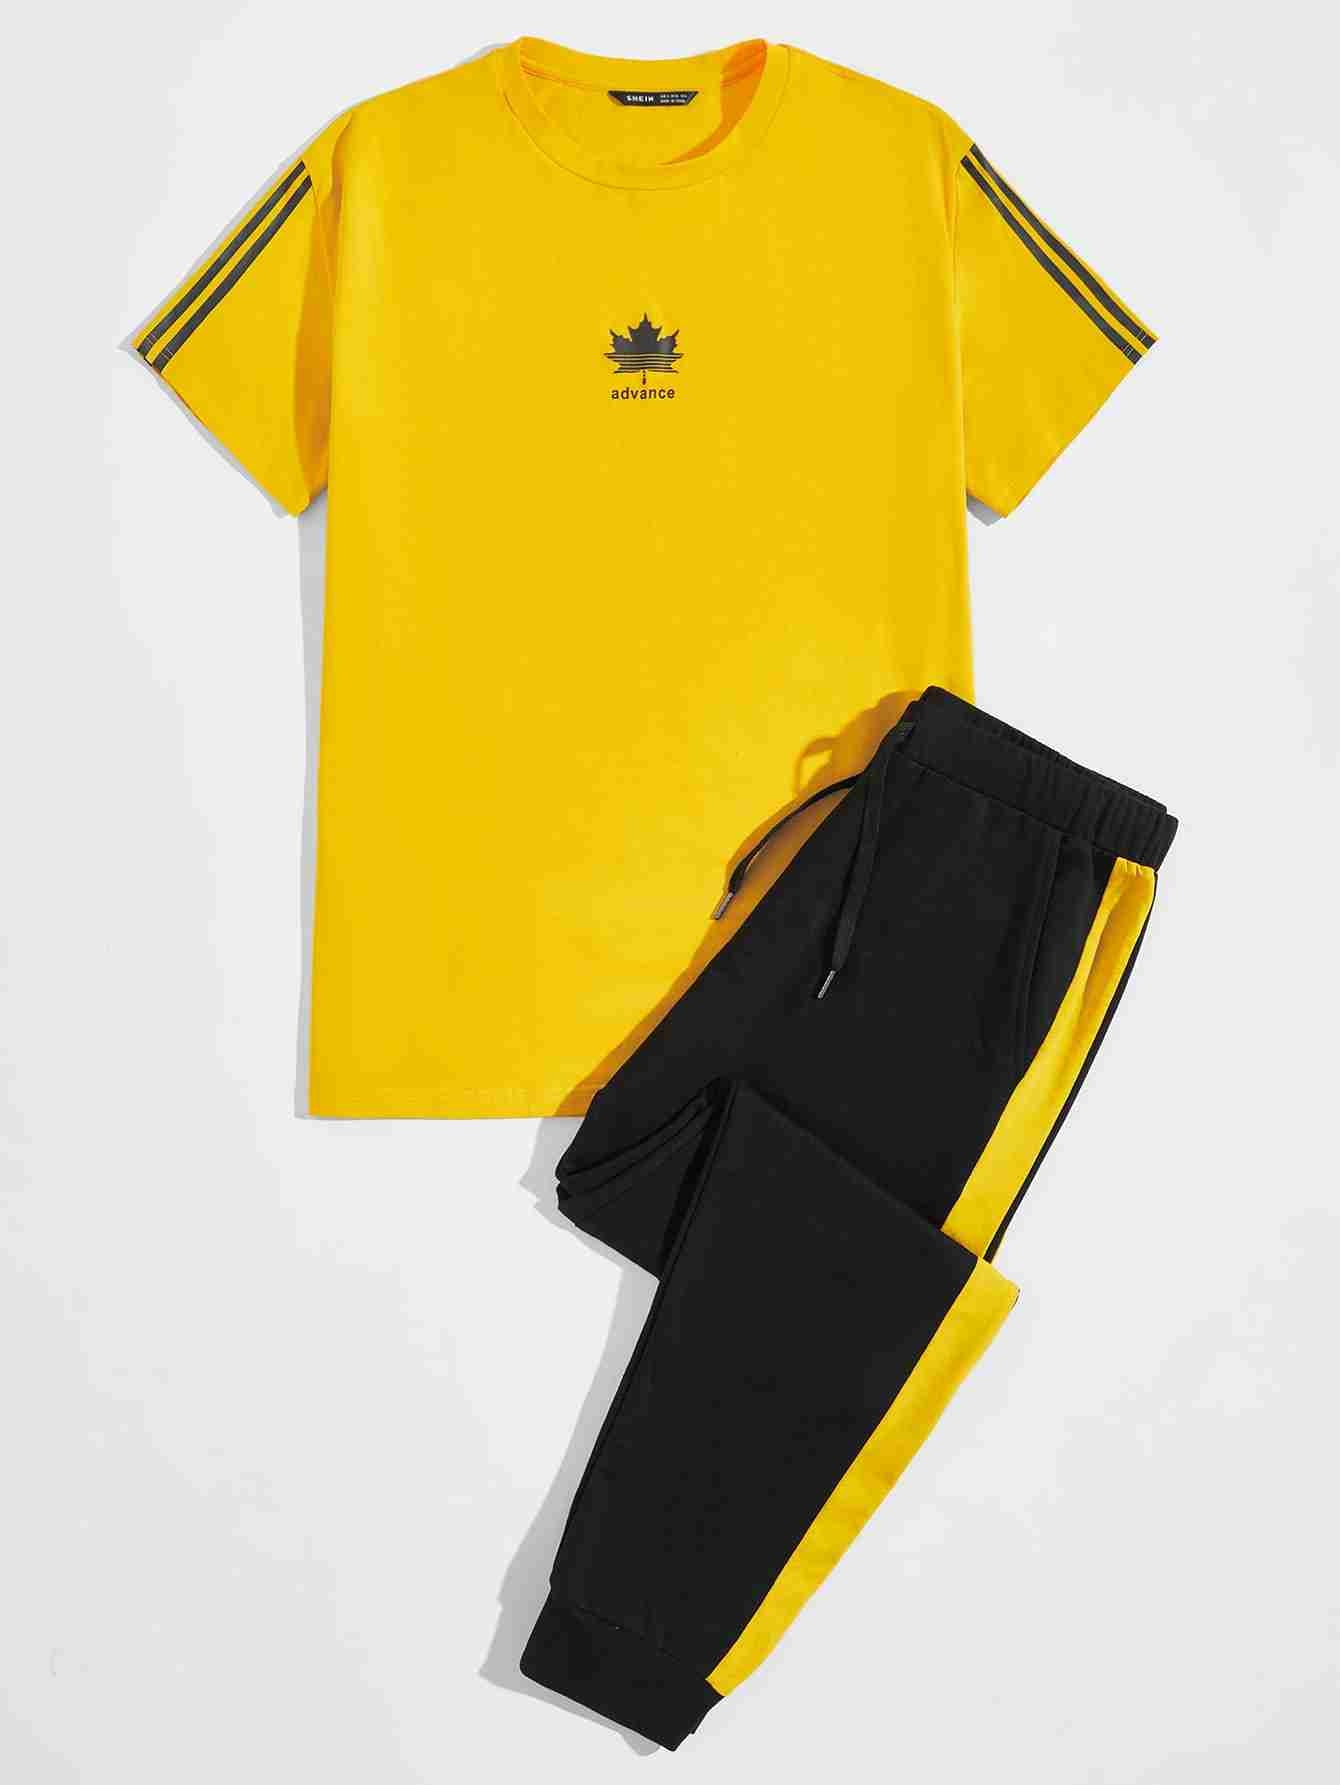 Advance Yellow And Black Tracksuit